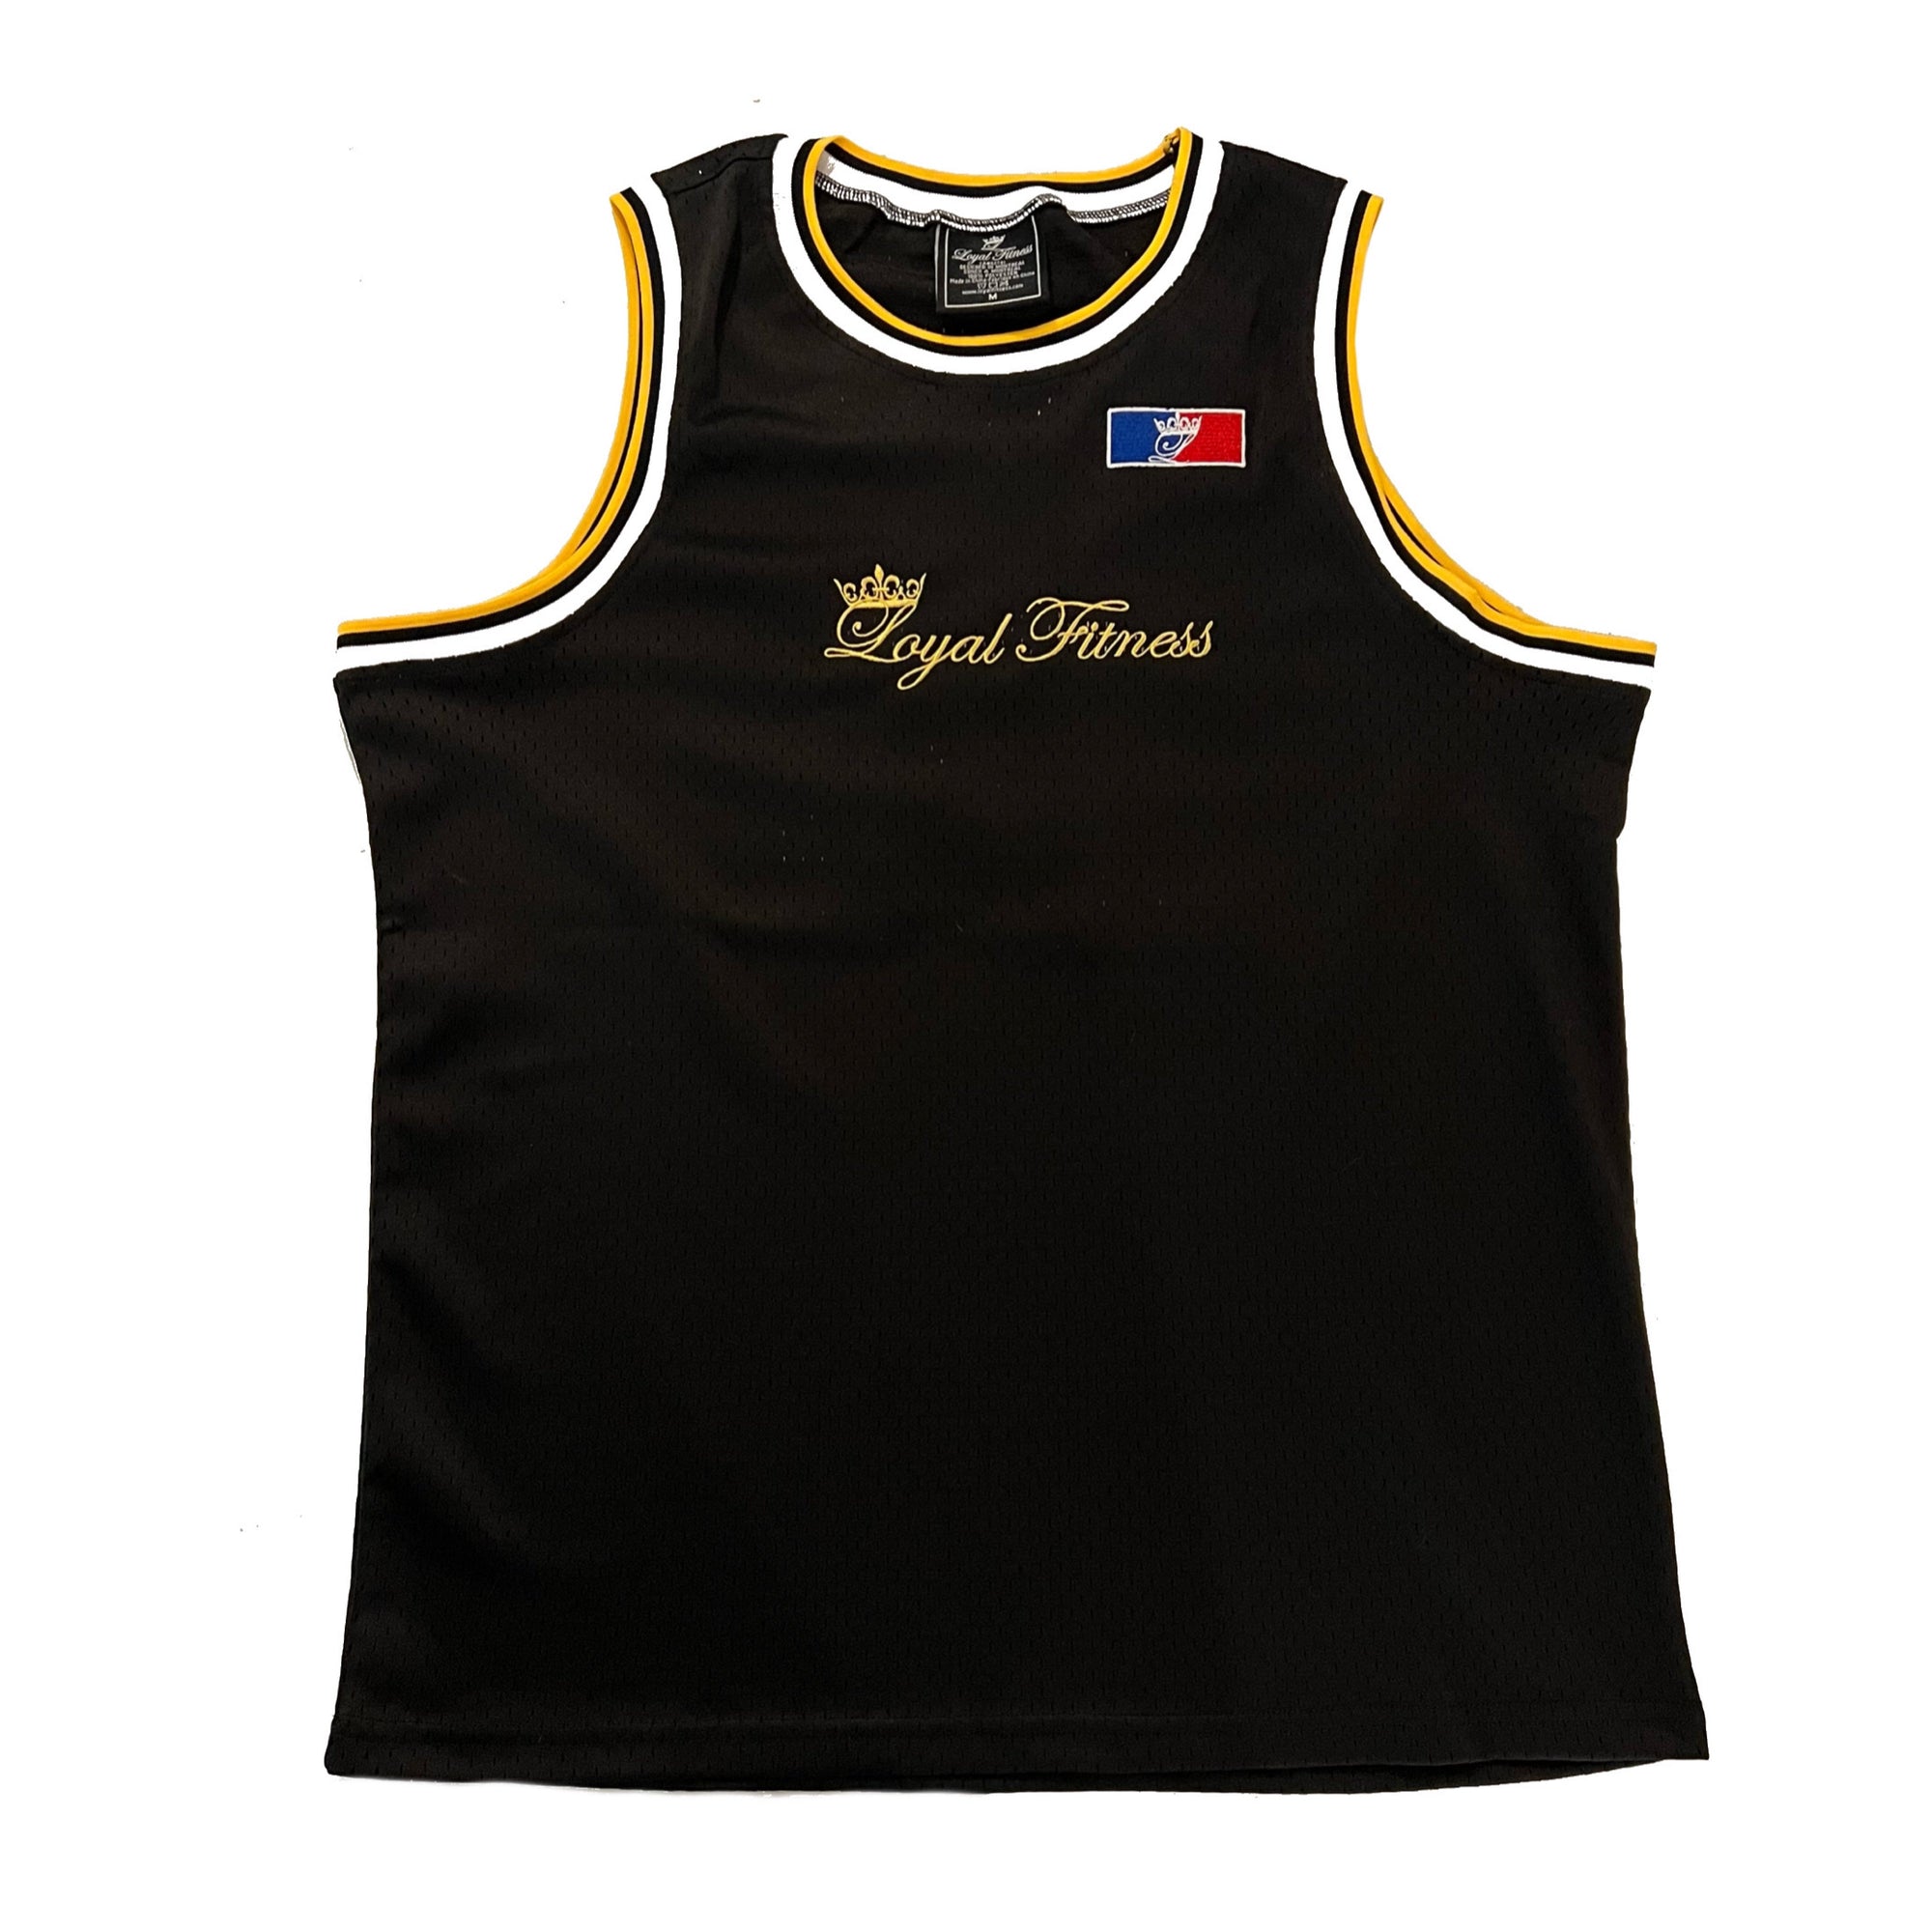 Jersey - Gold 2